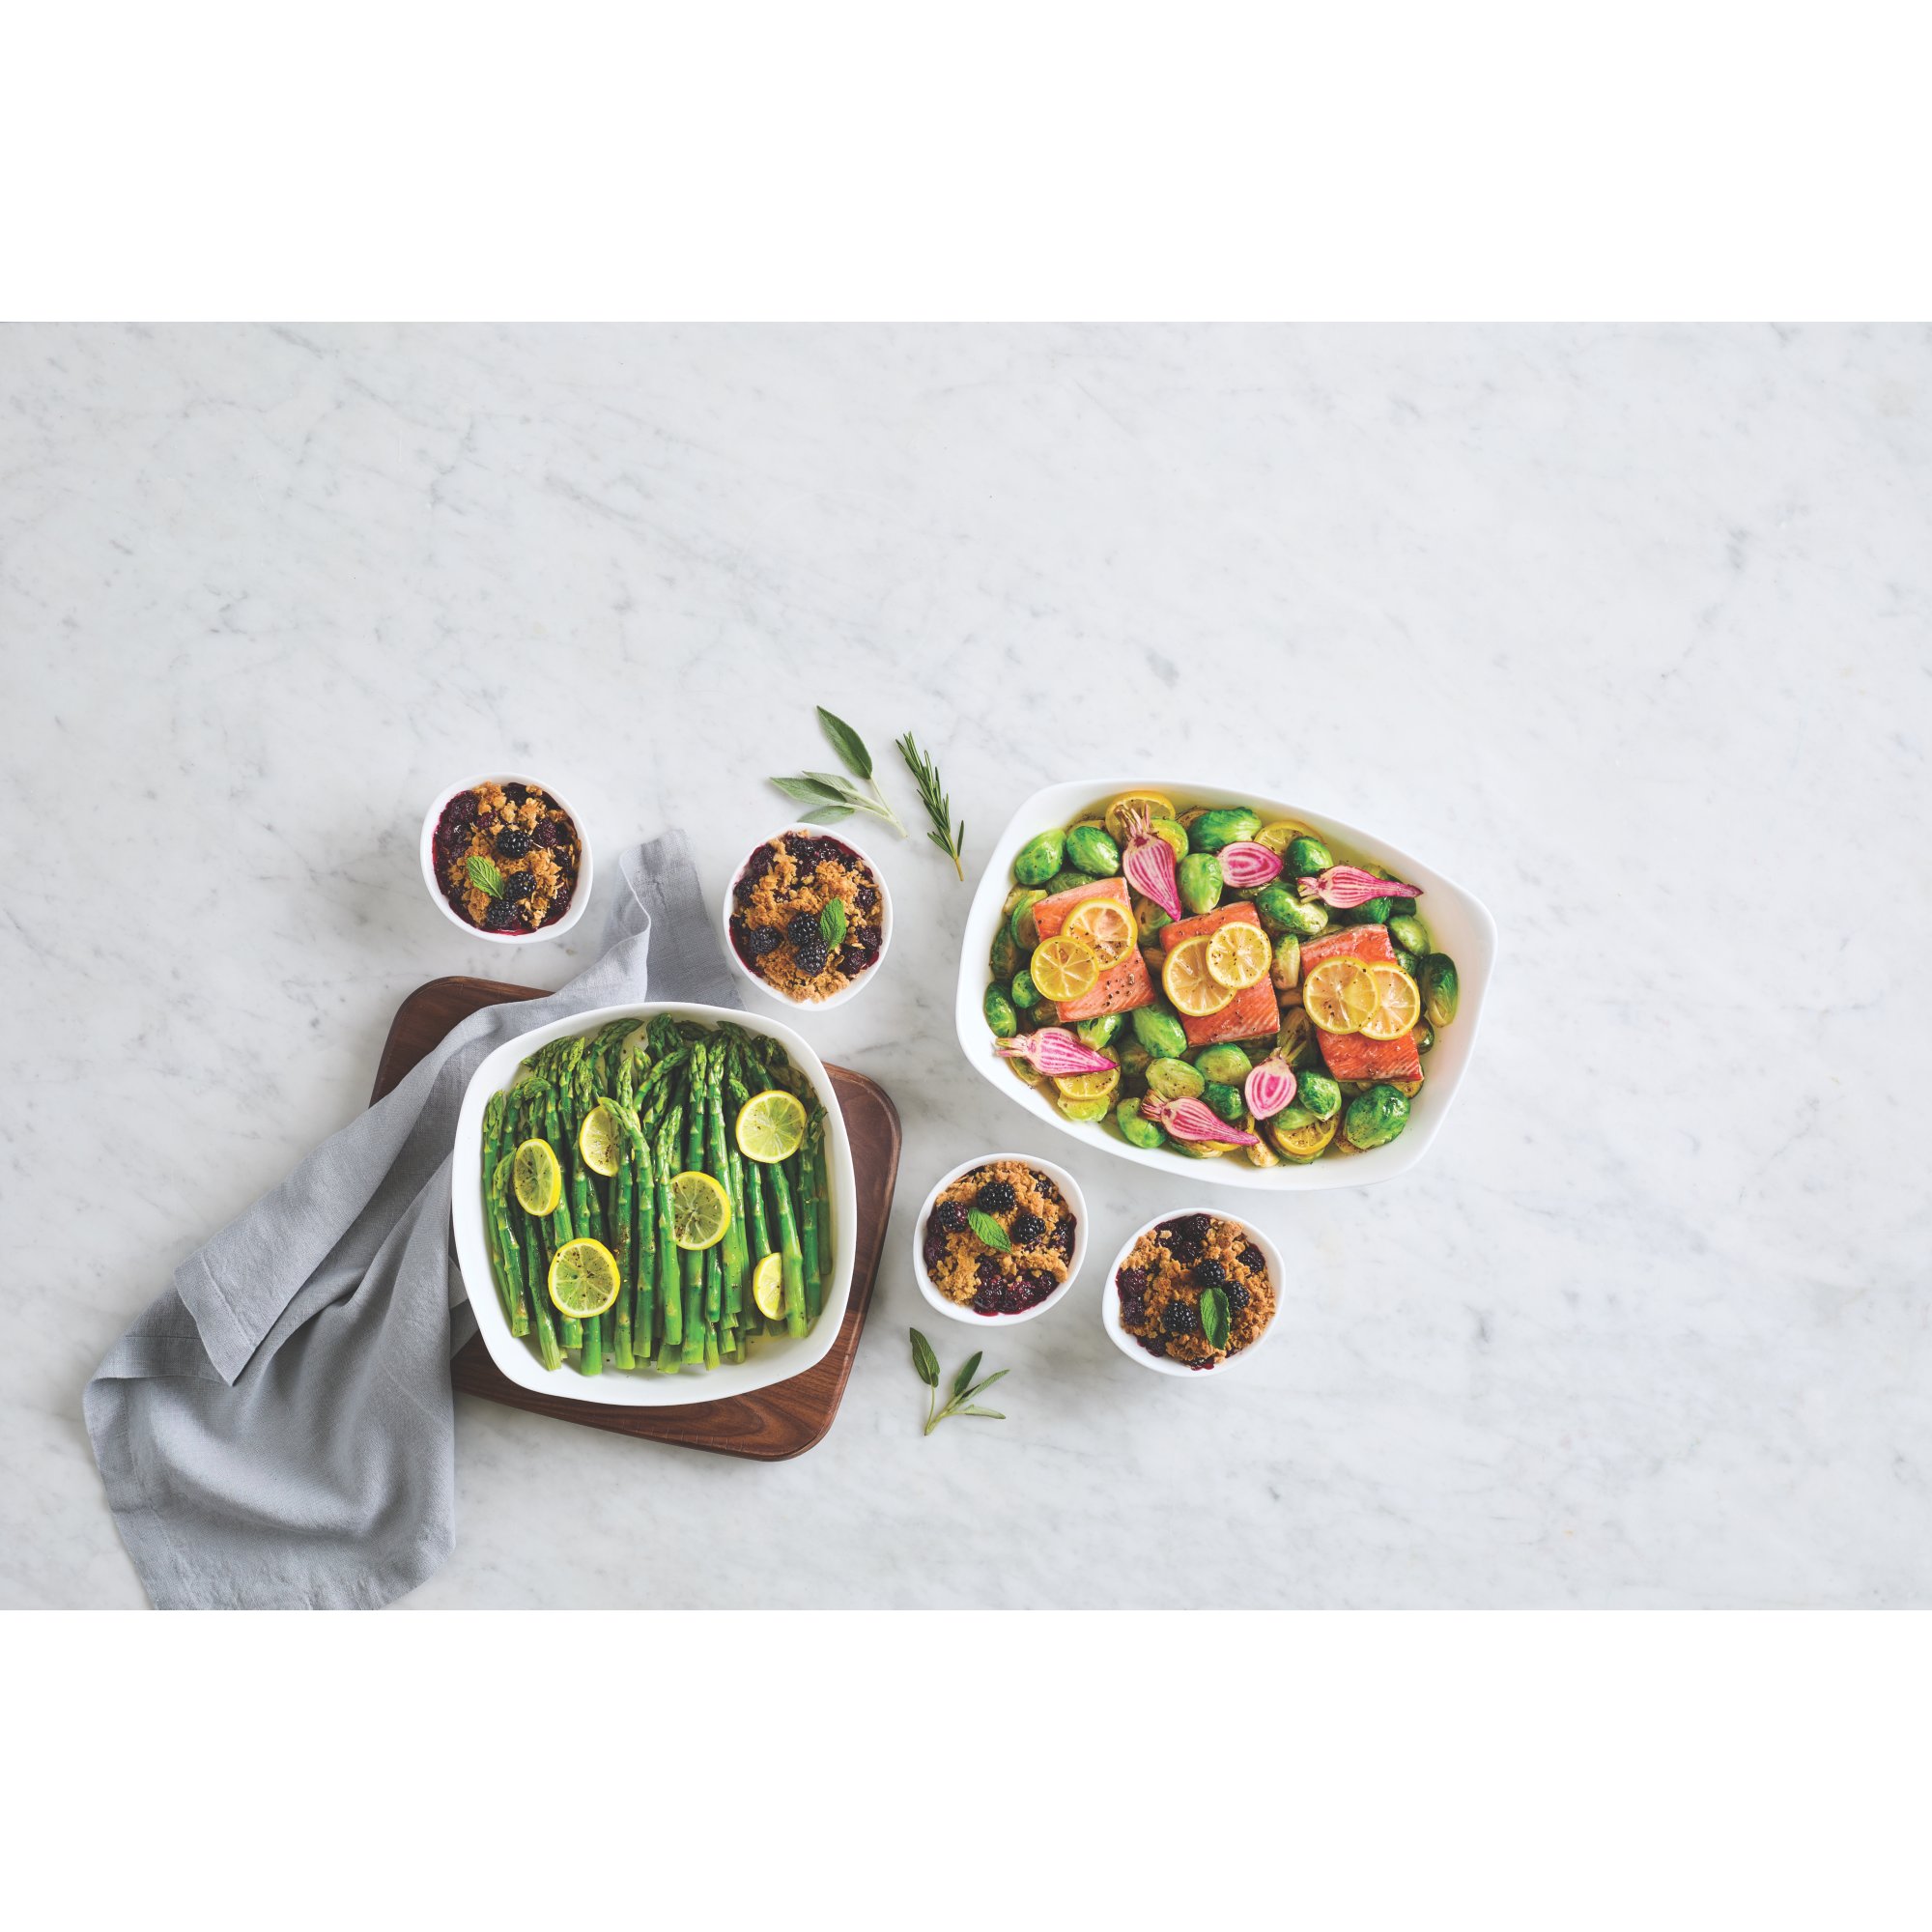 Rubbermaid Upgrades Weeknight Dinners with New DuraLite™ Bakeware Tuesday  Night